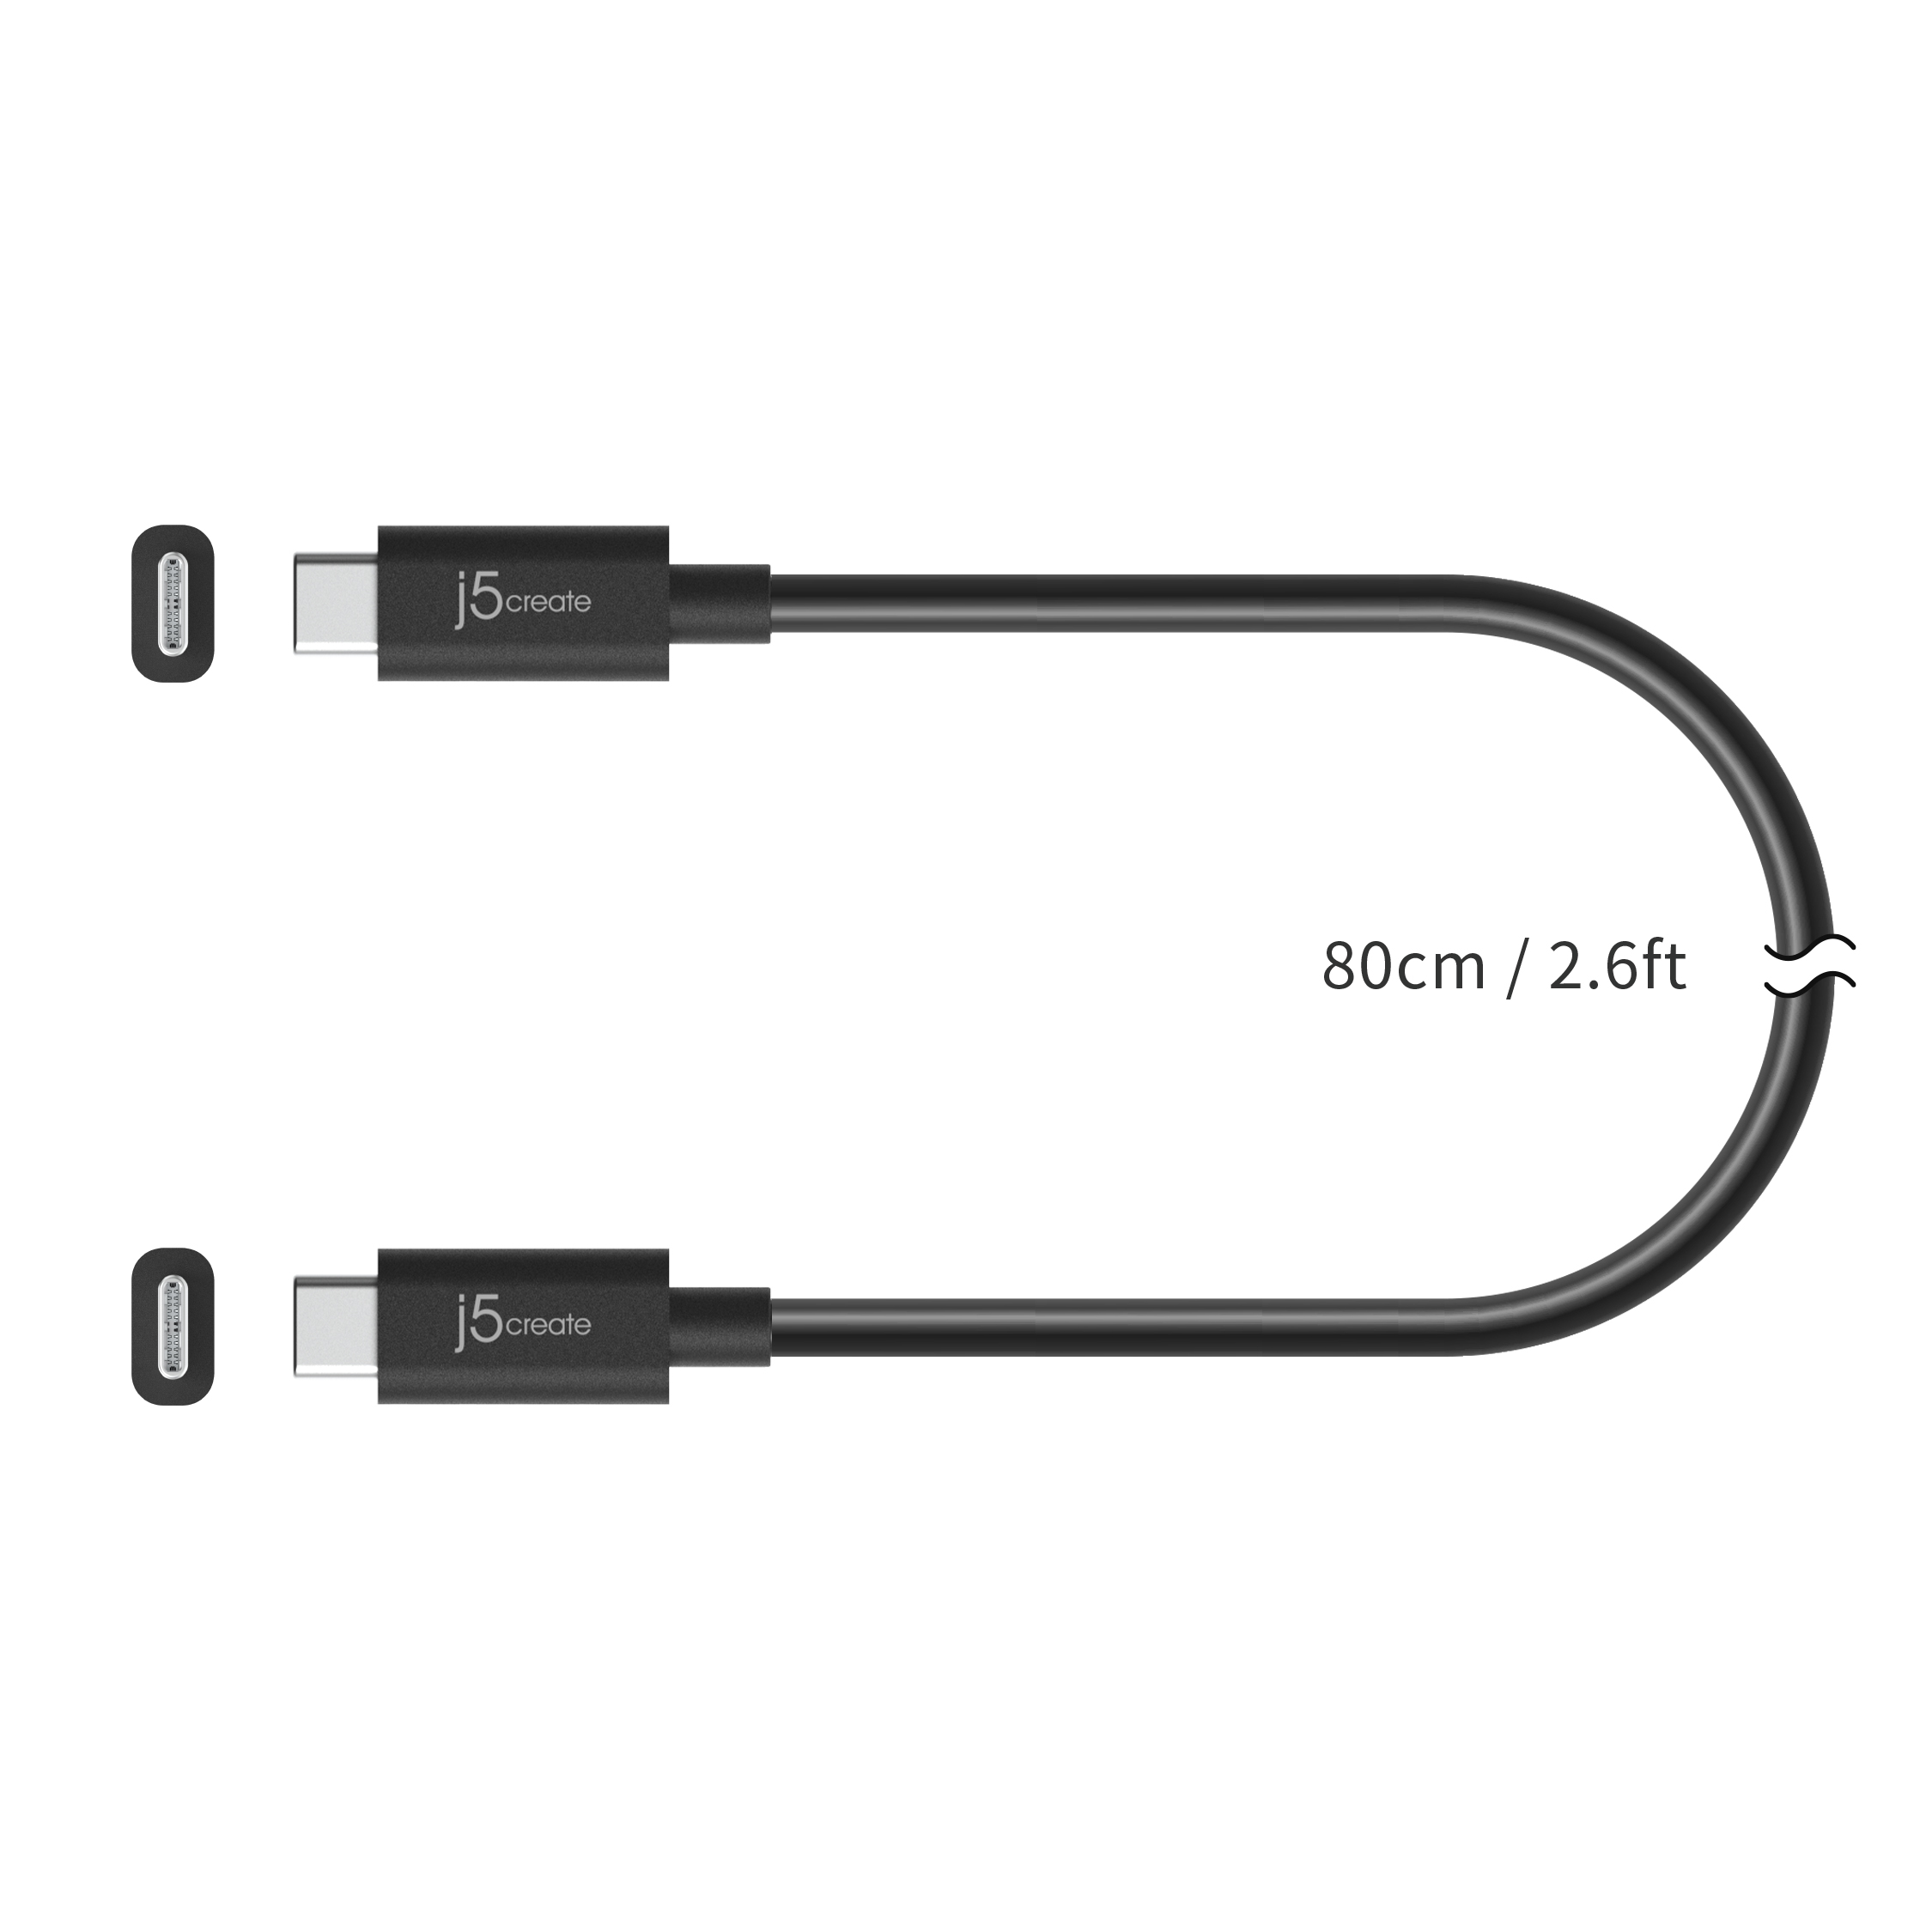 j5create Full-Featured USB-C Cable (USB4 Gen 3), JUC28L08 - image 2 of 8